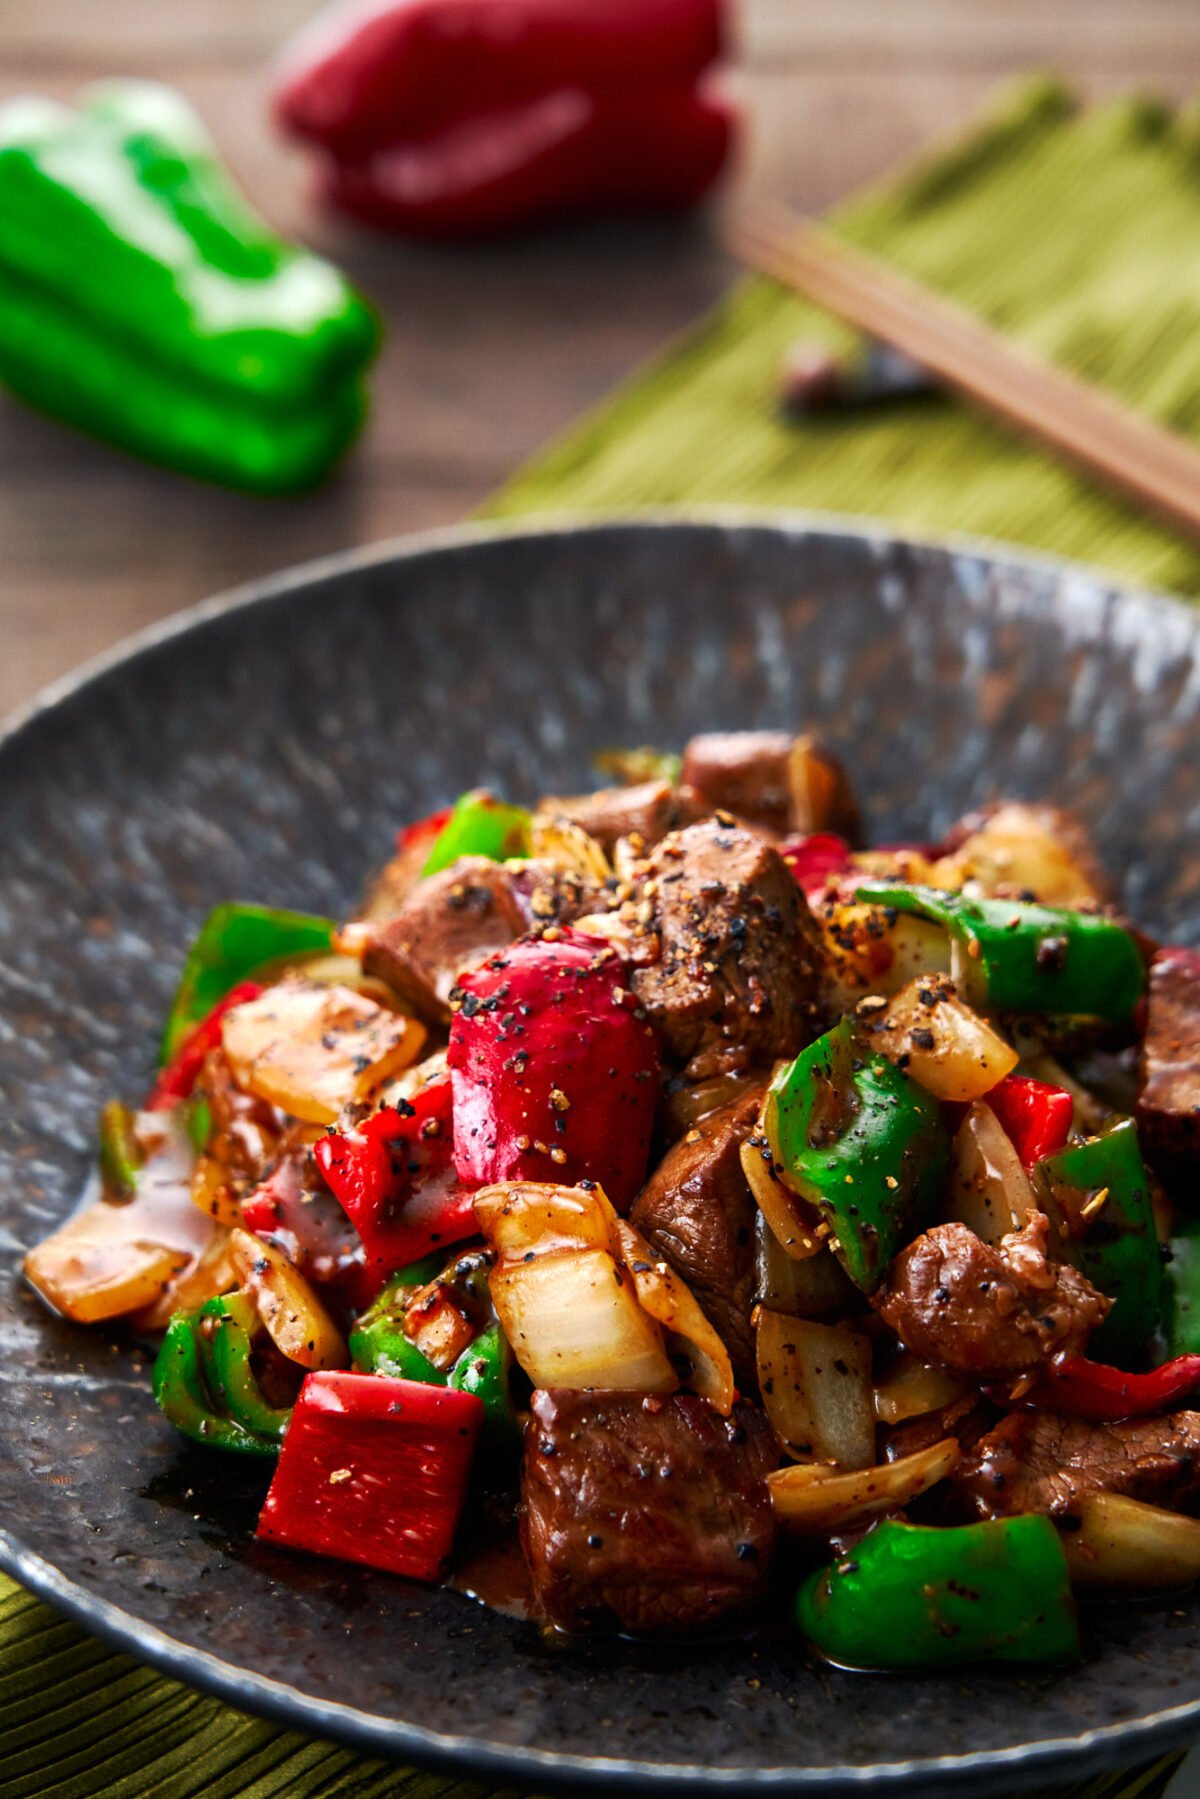 This Beef with Chinese Black Pepper Sauce recipe is an easy stir-fry with big juicy chunks of steak, onions, and peppers glazed in fragrant pepper sauce.